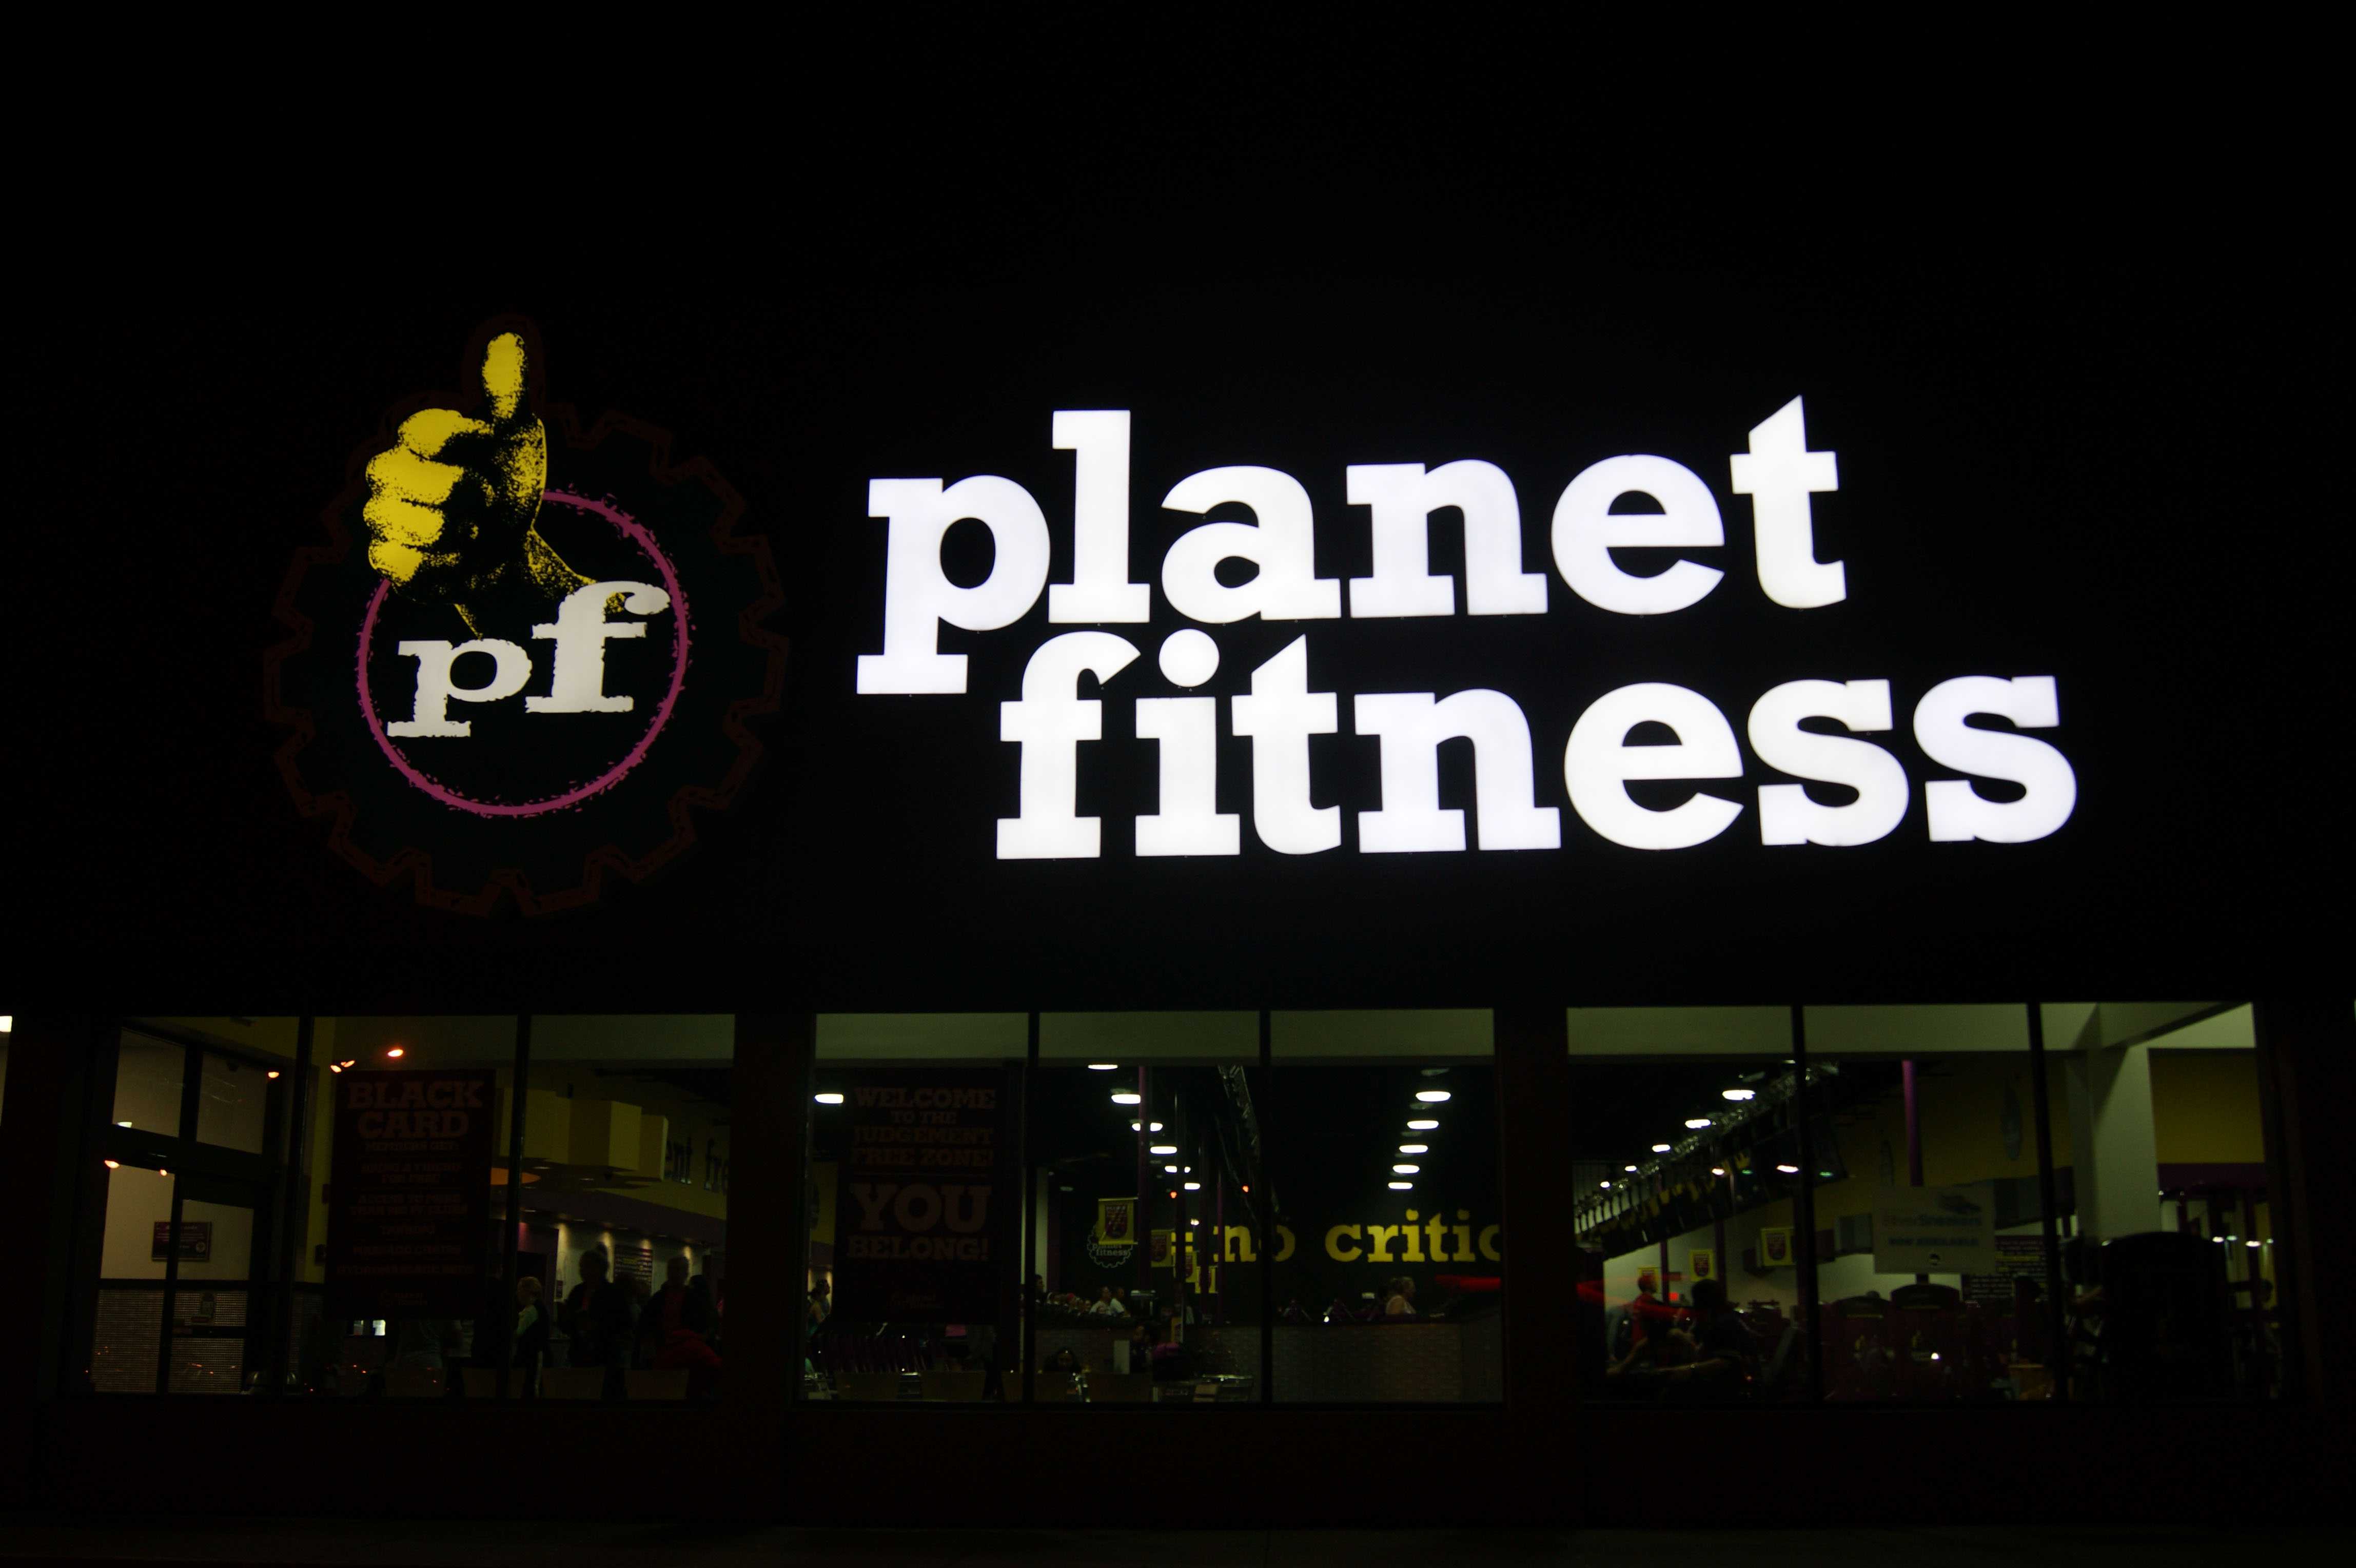 30 Minute How many planet fitness gyms in south africa for Push Pull Legs